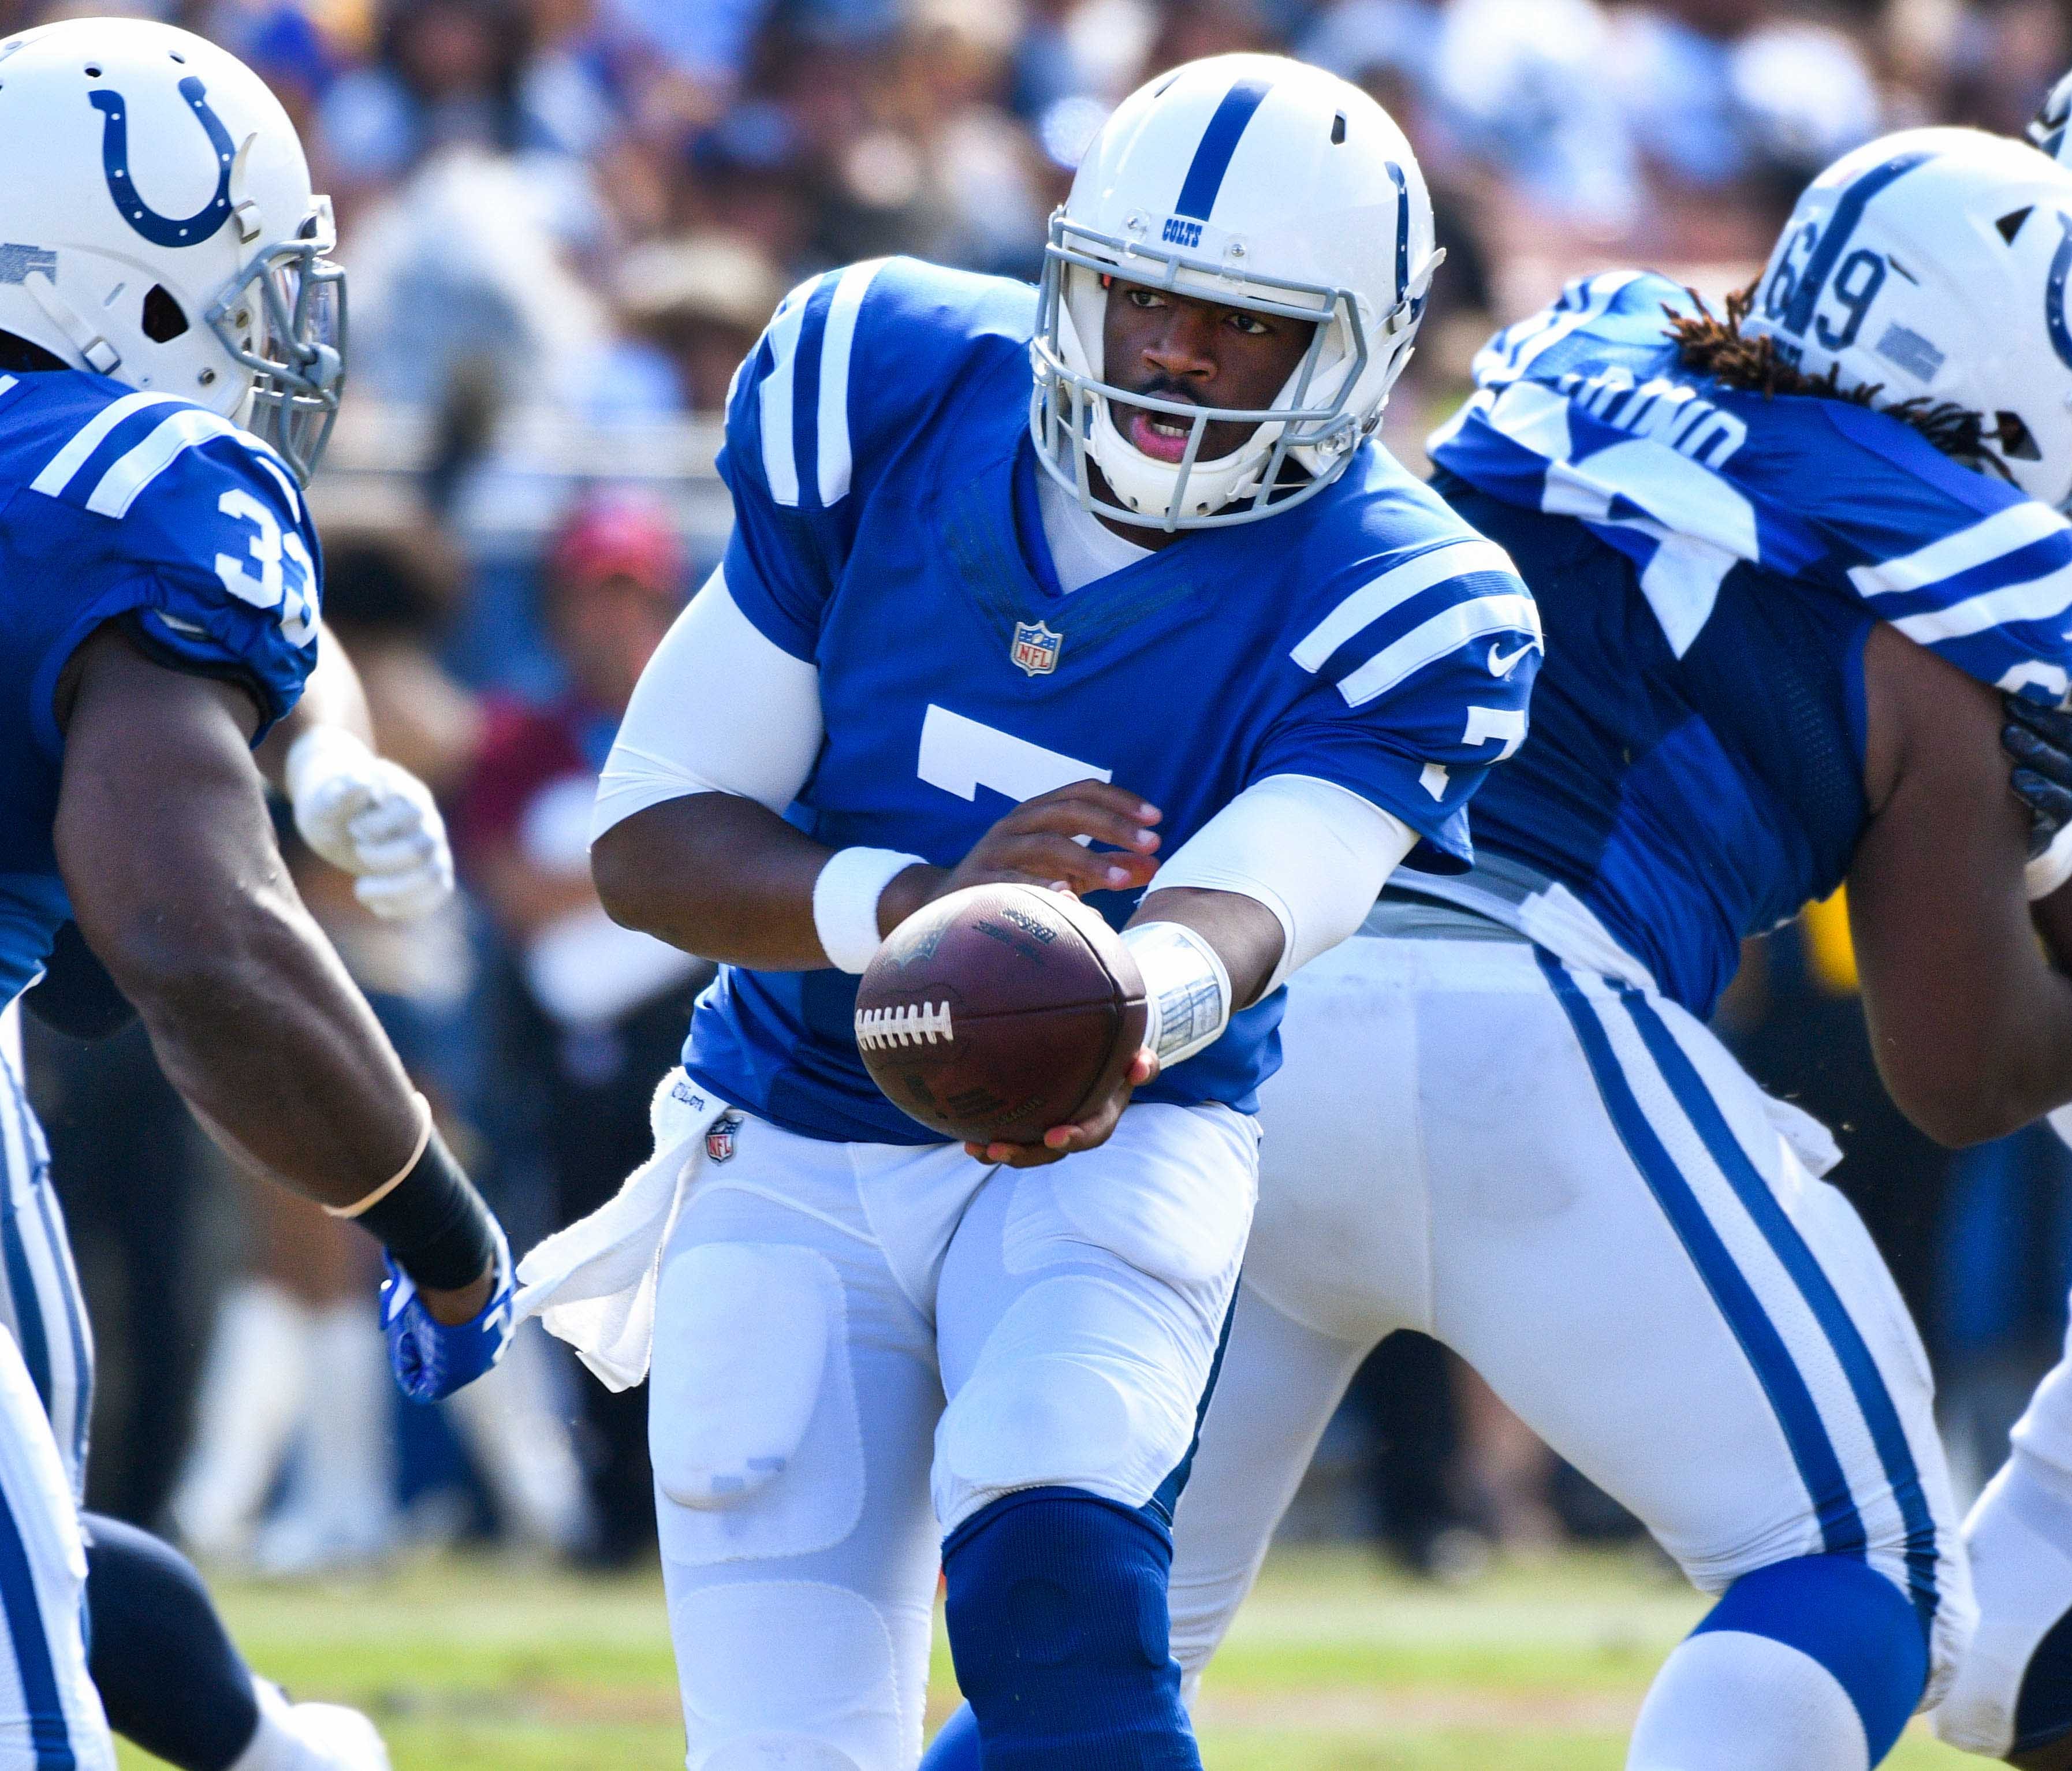 Indianapolis Colts quarterback Jacoby Brissett hands off the ball to running back Robert Turbin (33) during the second half against the Los Angeles Rams at Los Angeles Memorial Coliseum.